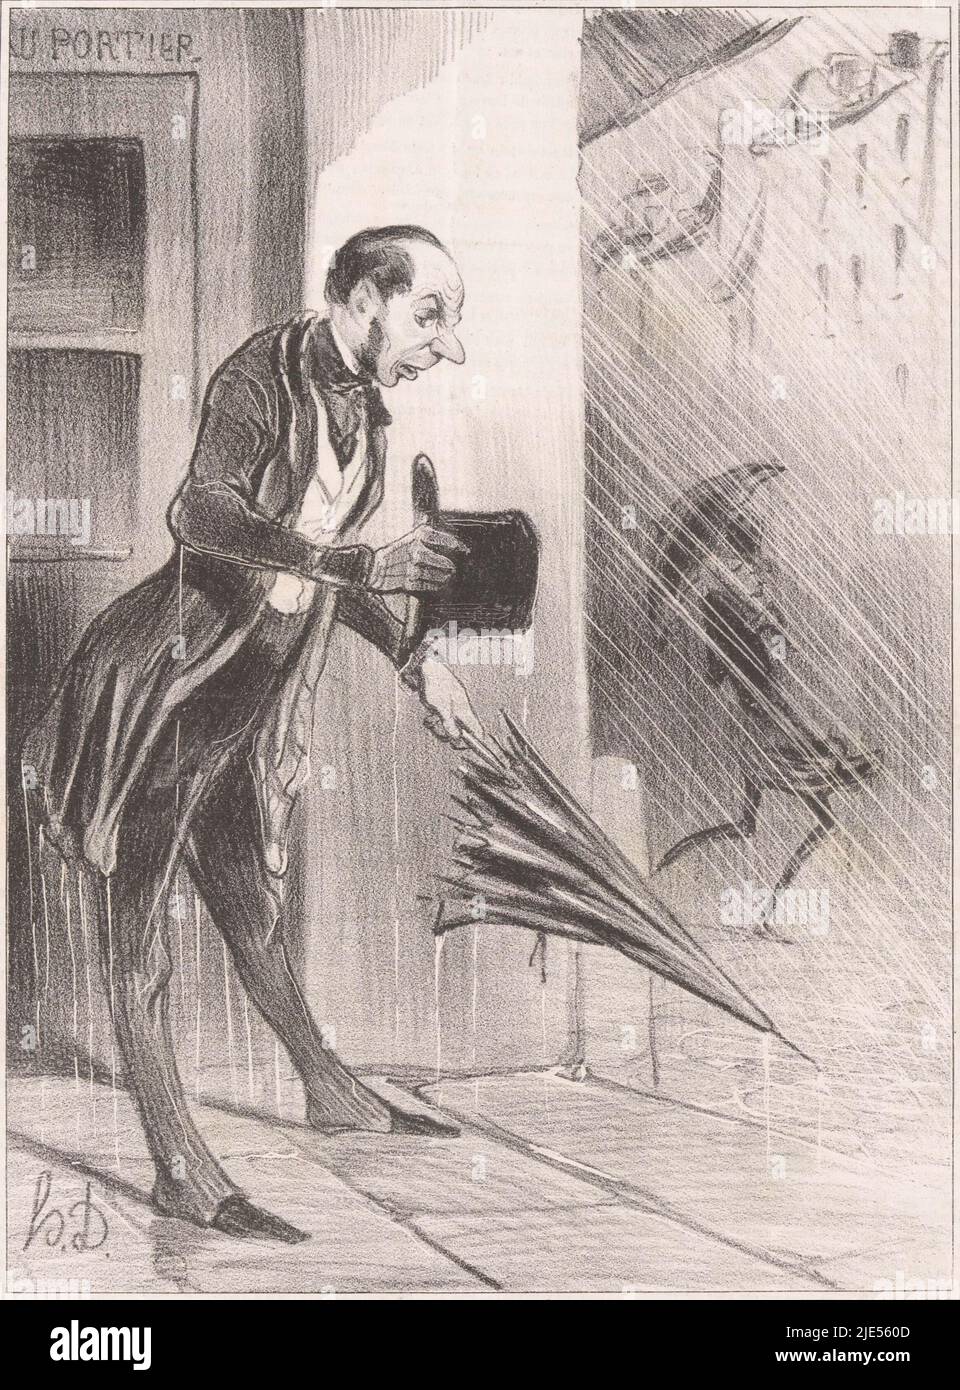 Man tries to open new umbrella in the rain Parisian emotions (series title) Émotions Parisiennes (series title on object), print maker: Honoré Daumier, (mentioned on object), printer: Aubert & Cie., (mentioned on object), publisher: Bauger, (mentioned on object), Paris, 1840, paper, letterpress printing, h 363 mm × w 245 mm Stock Photo